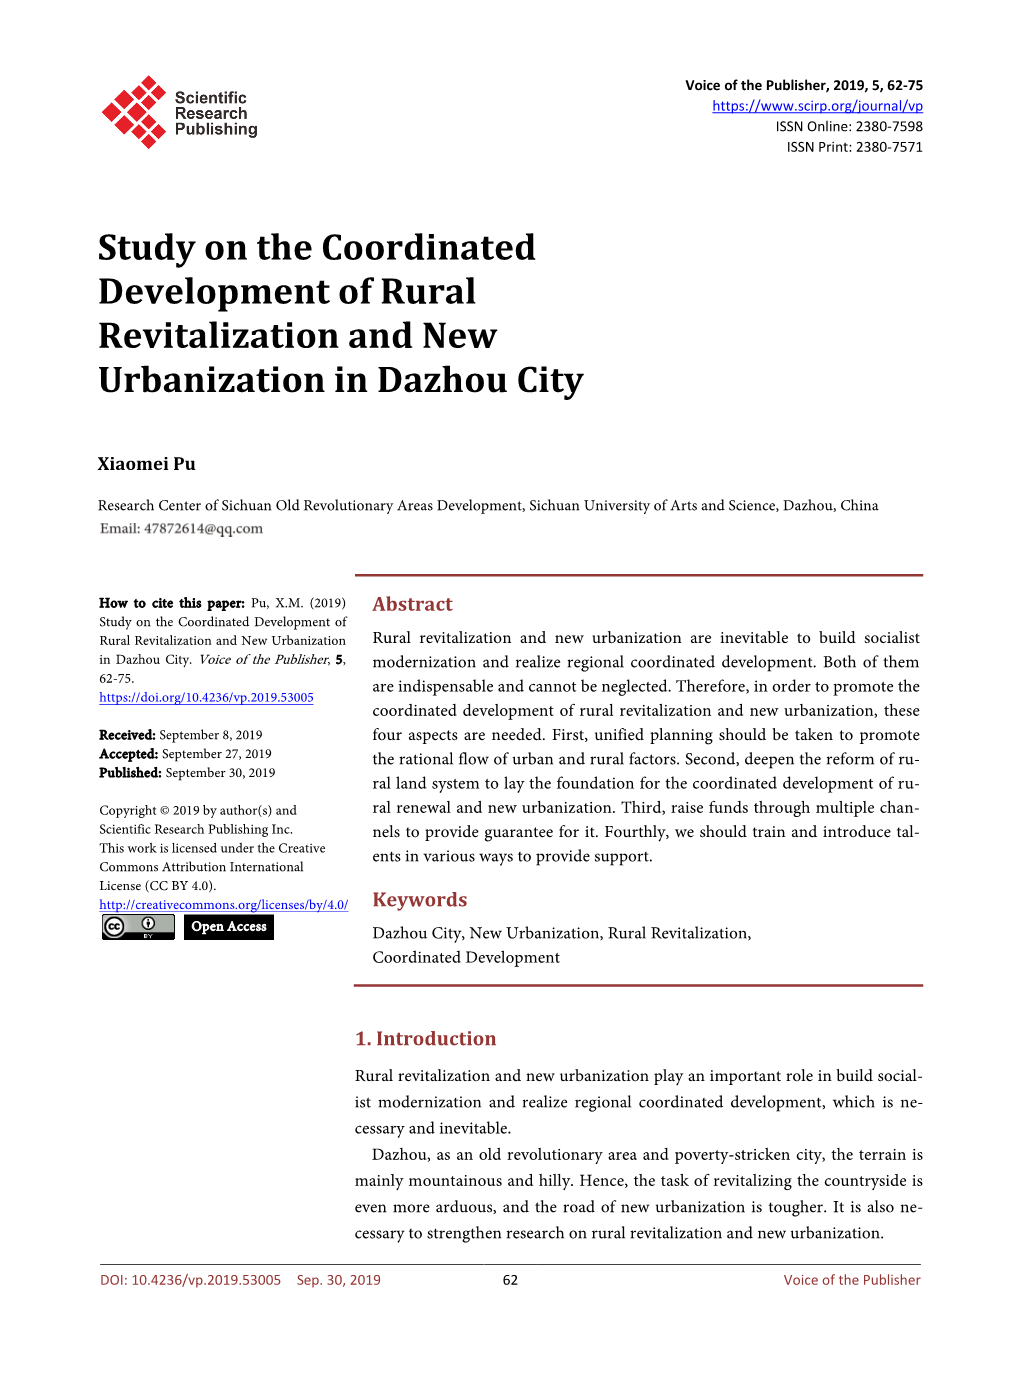 Study on the Coordinated Development of Rural Revitalization and New Urbanization in Dazhou City